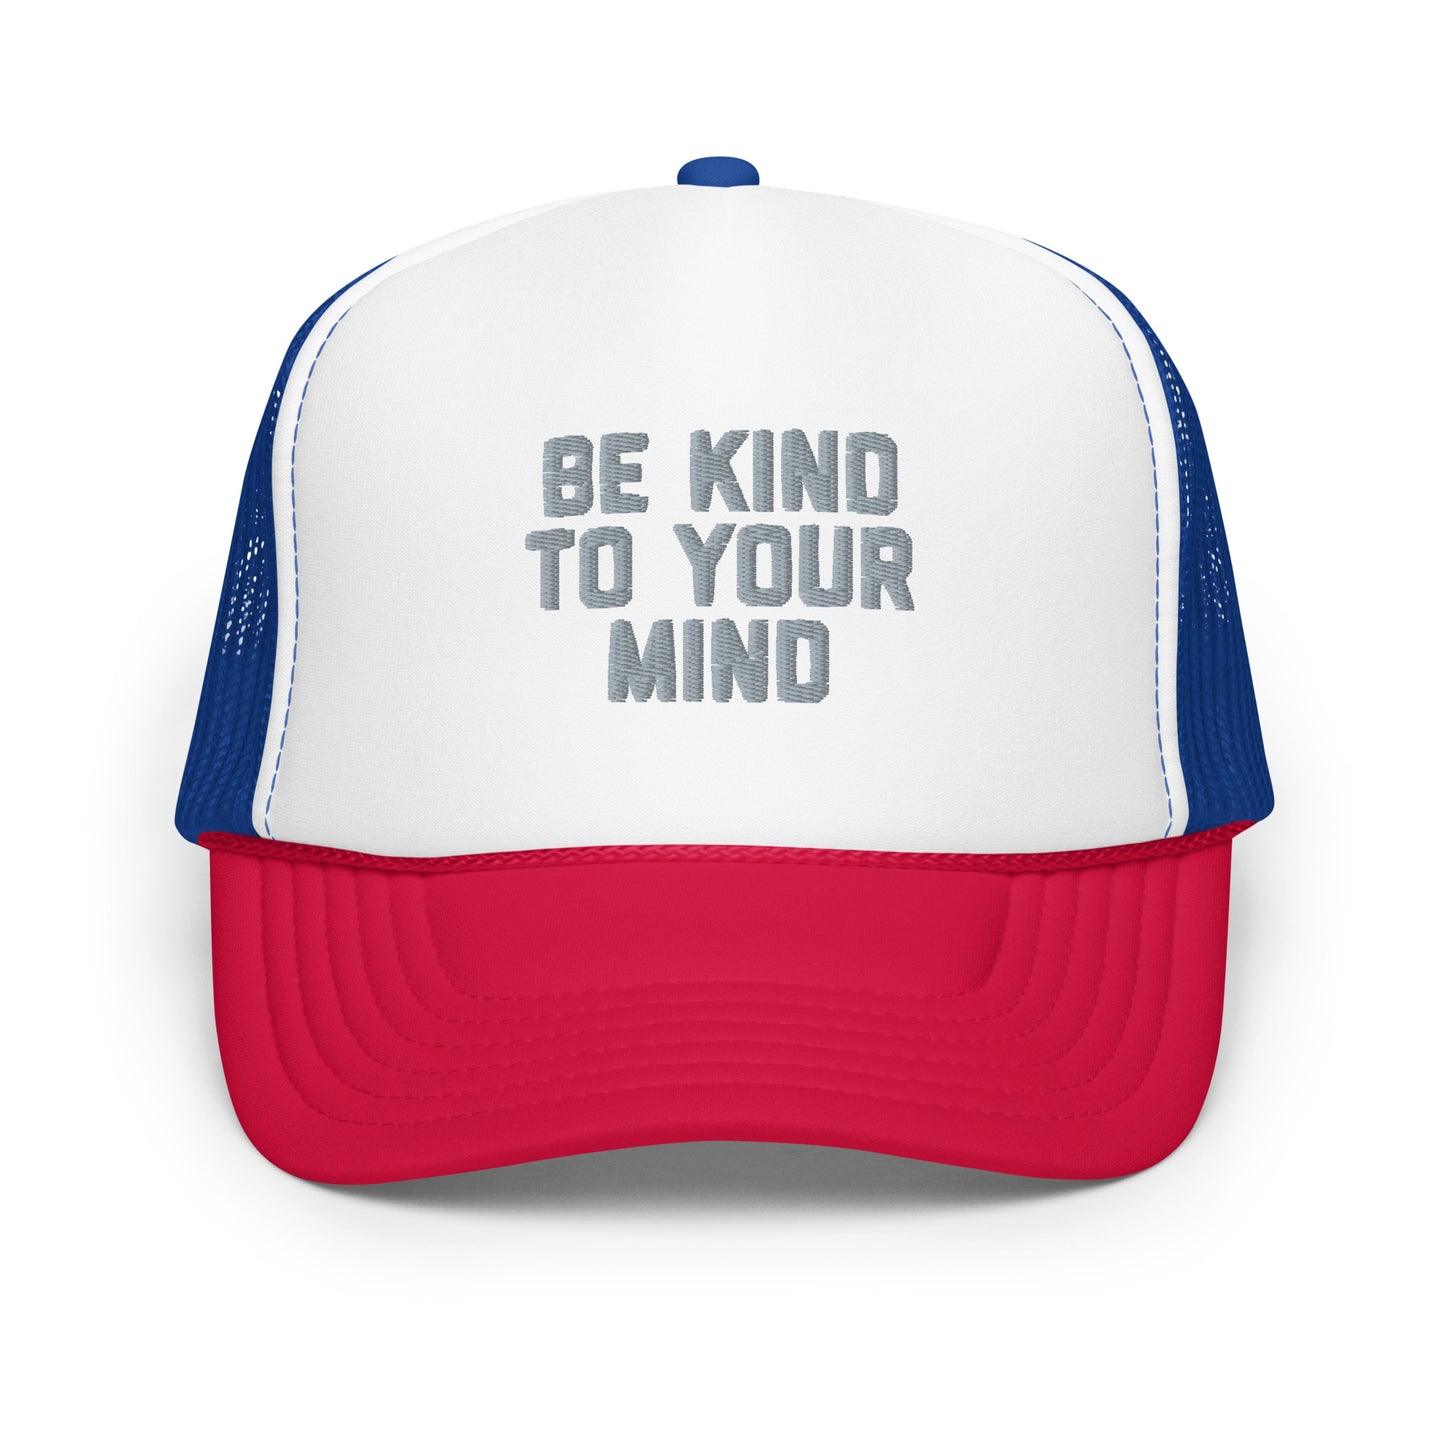 Be Kind To Your Mind Foam trucker hat